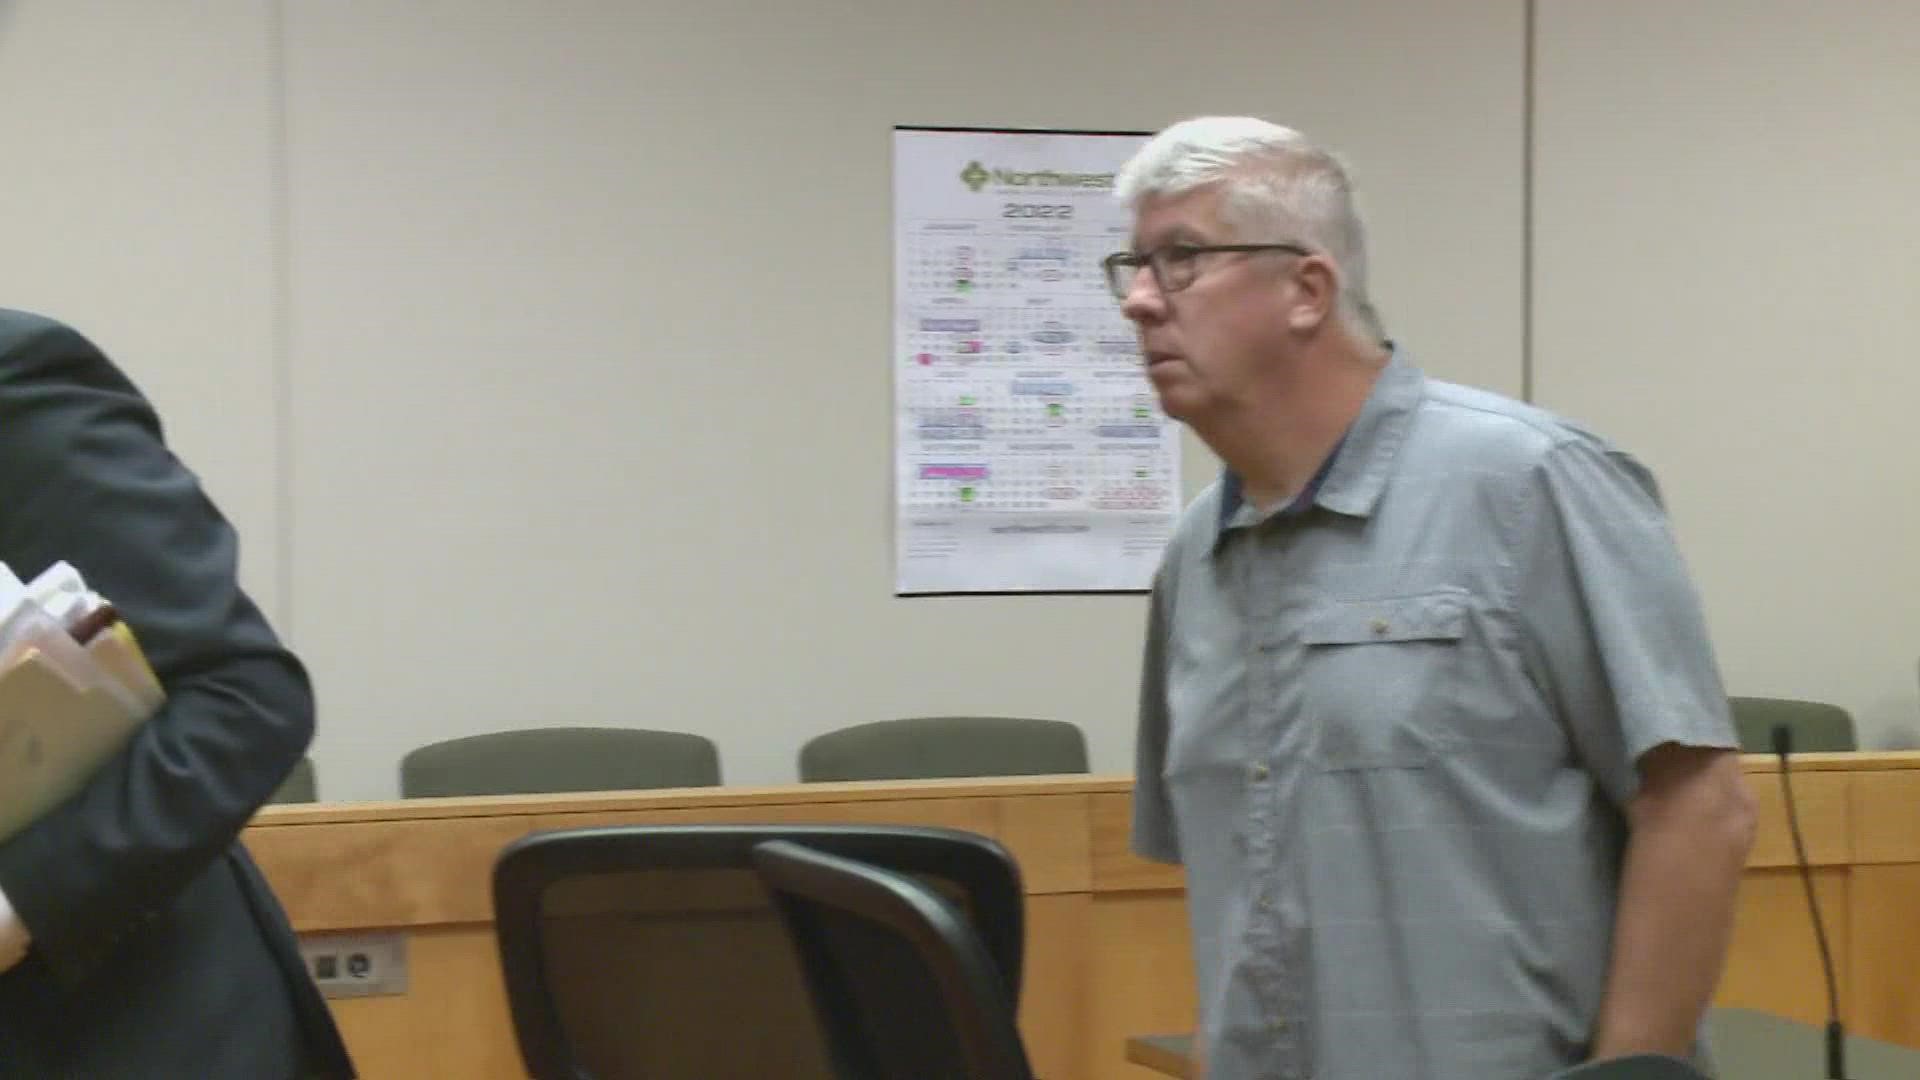 Sheriff Wade Majors pleaded guilty in the case from last year, where he was accused of covering up his son's DUI.